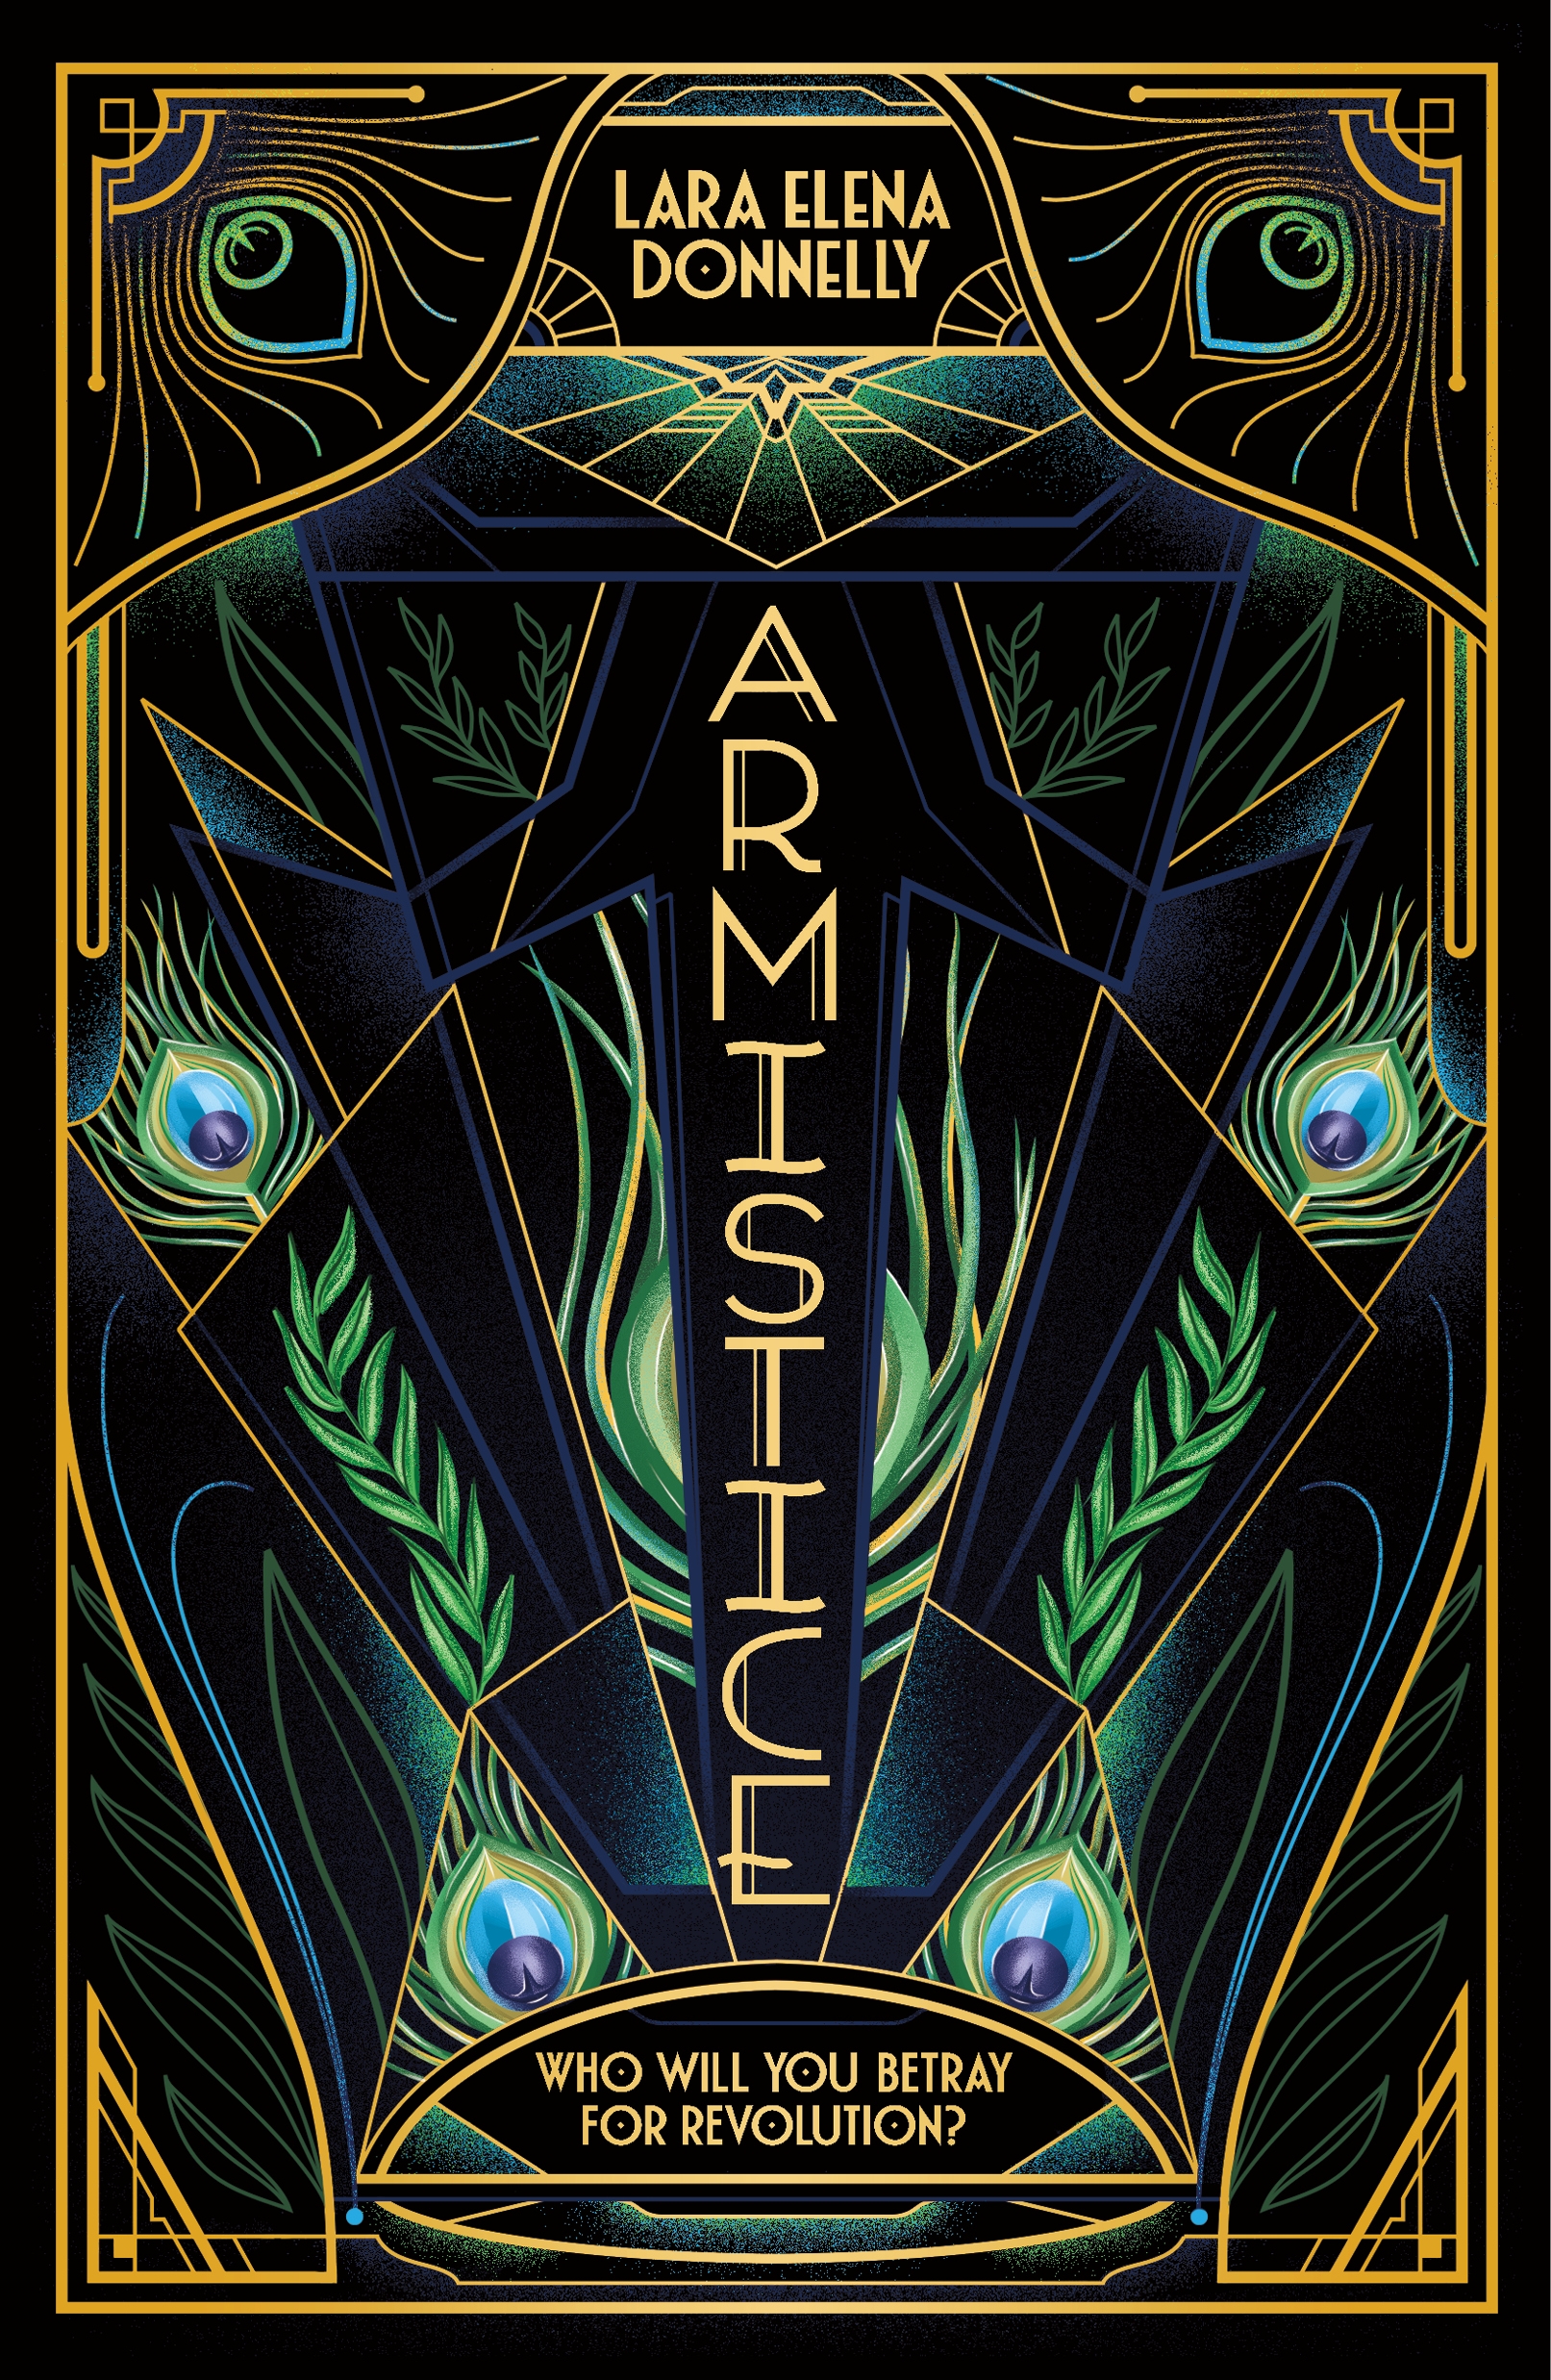 Armistice : Book 2 in the Amberlough Dossier by Lara Elena Donnelly